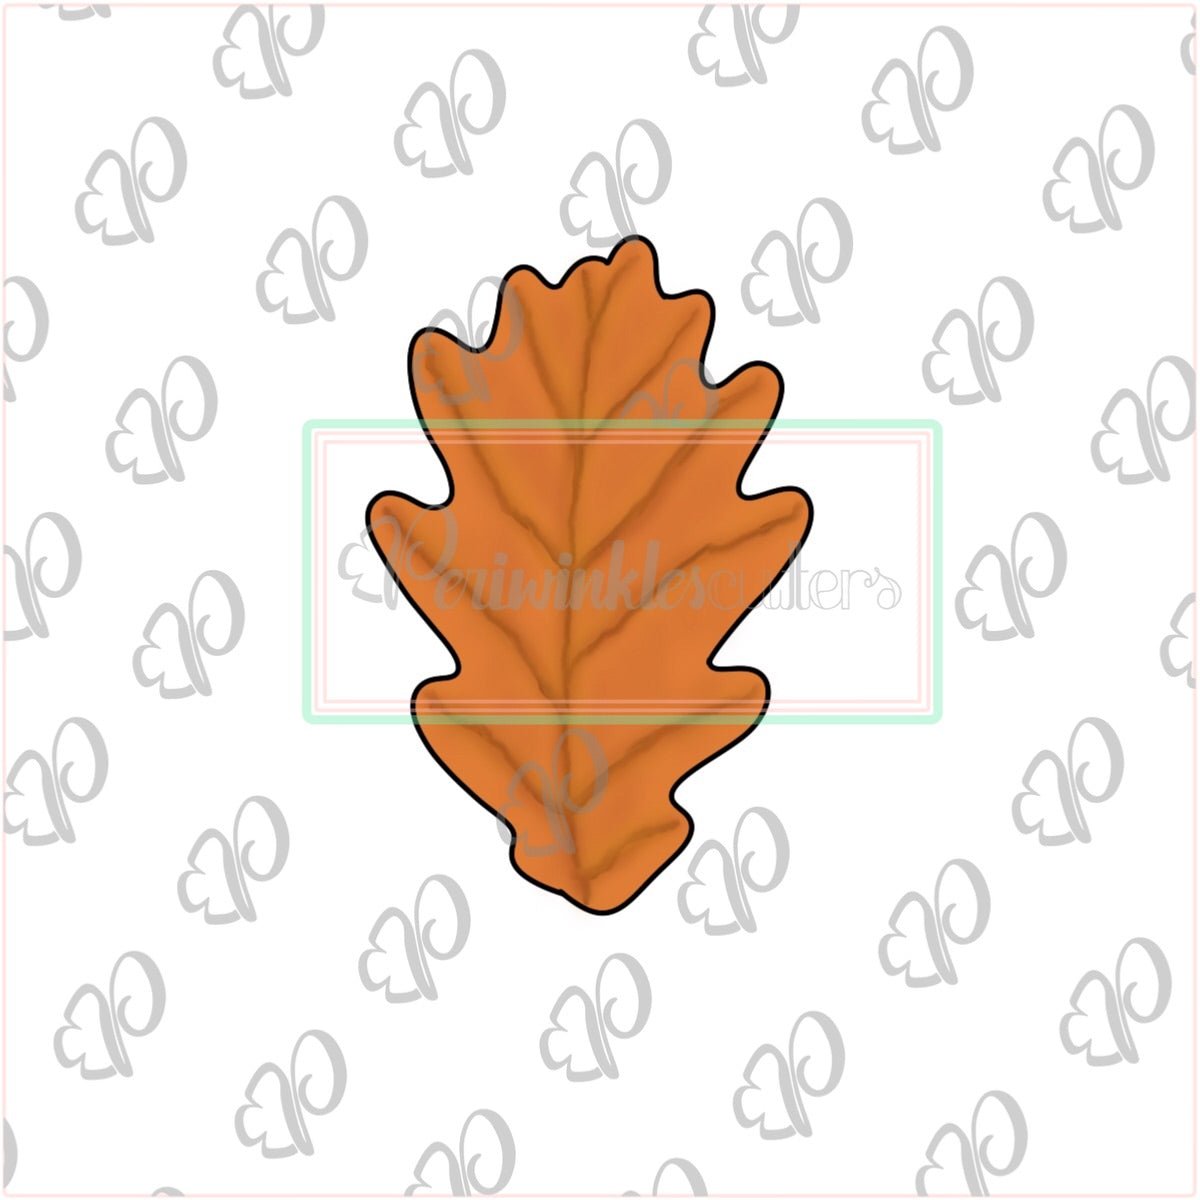 Fall Leaves 2019 Cookie Cutter - Leaf Cookie Cutter - Periwinkles Cutters